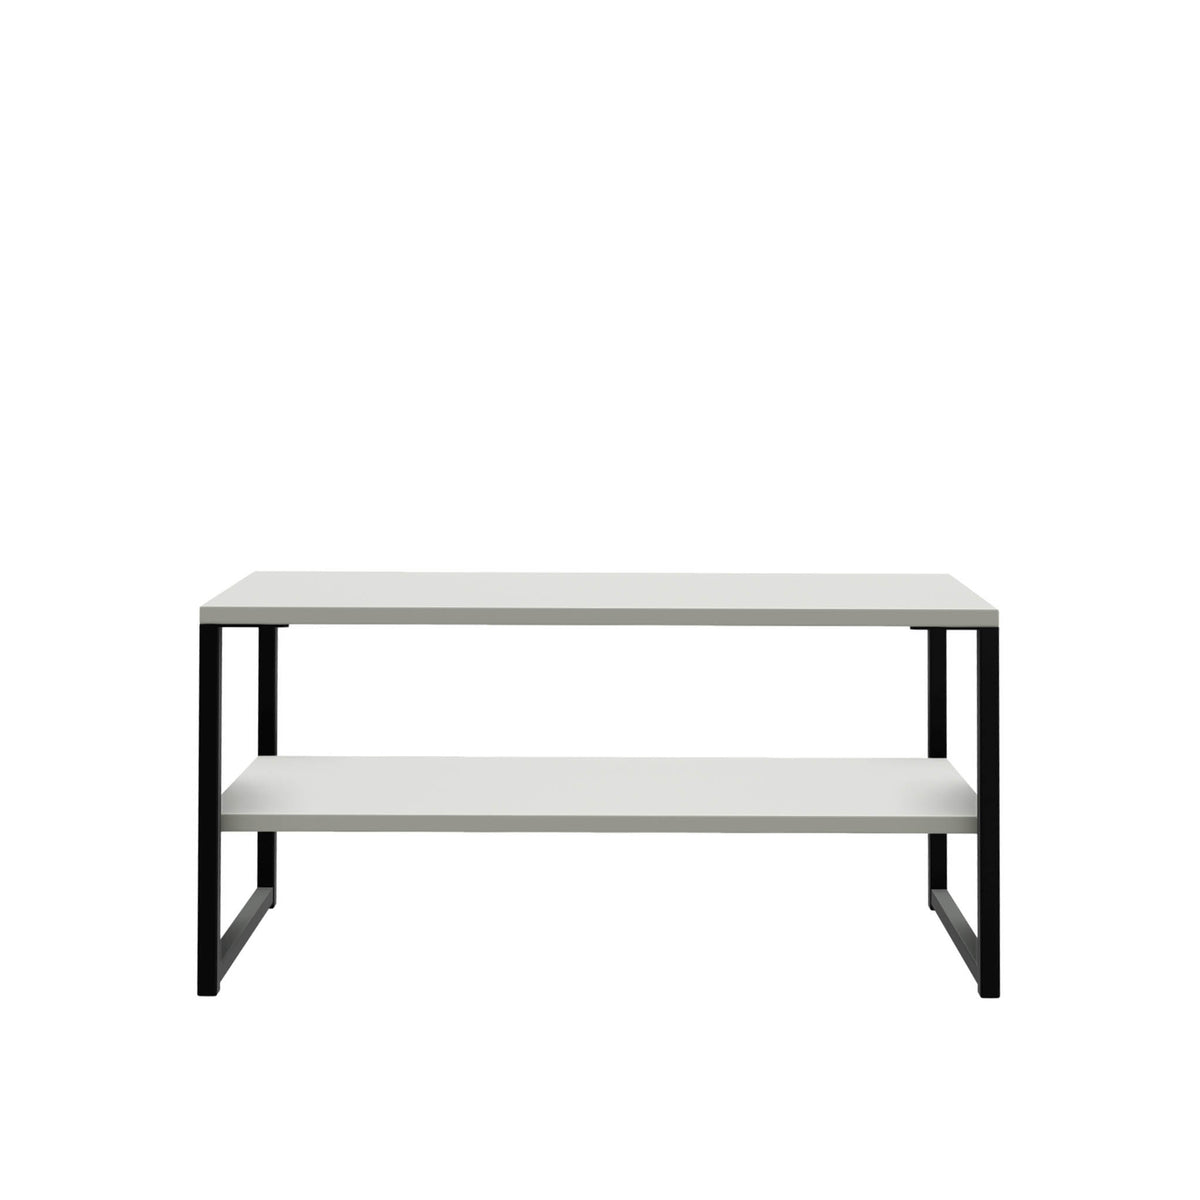 Hudson White Coffee Table with Shelf and black legs from Roseland